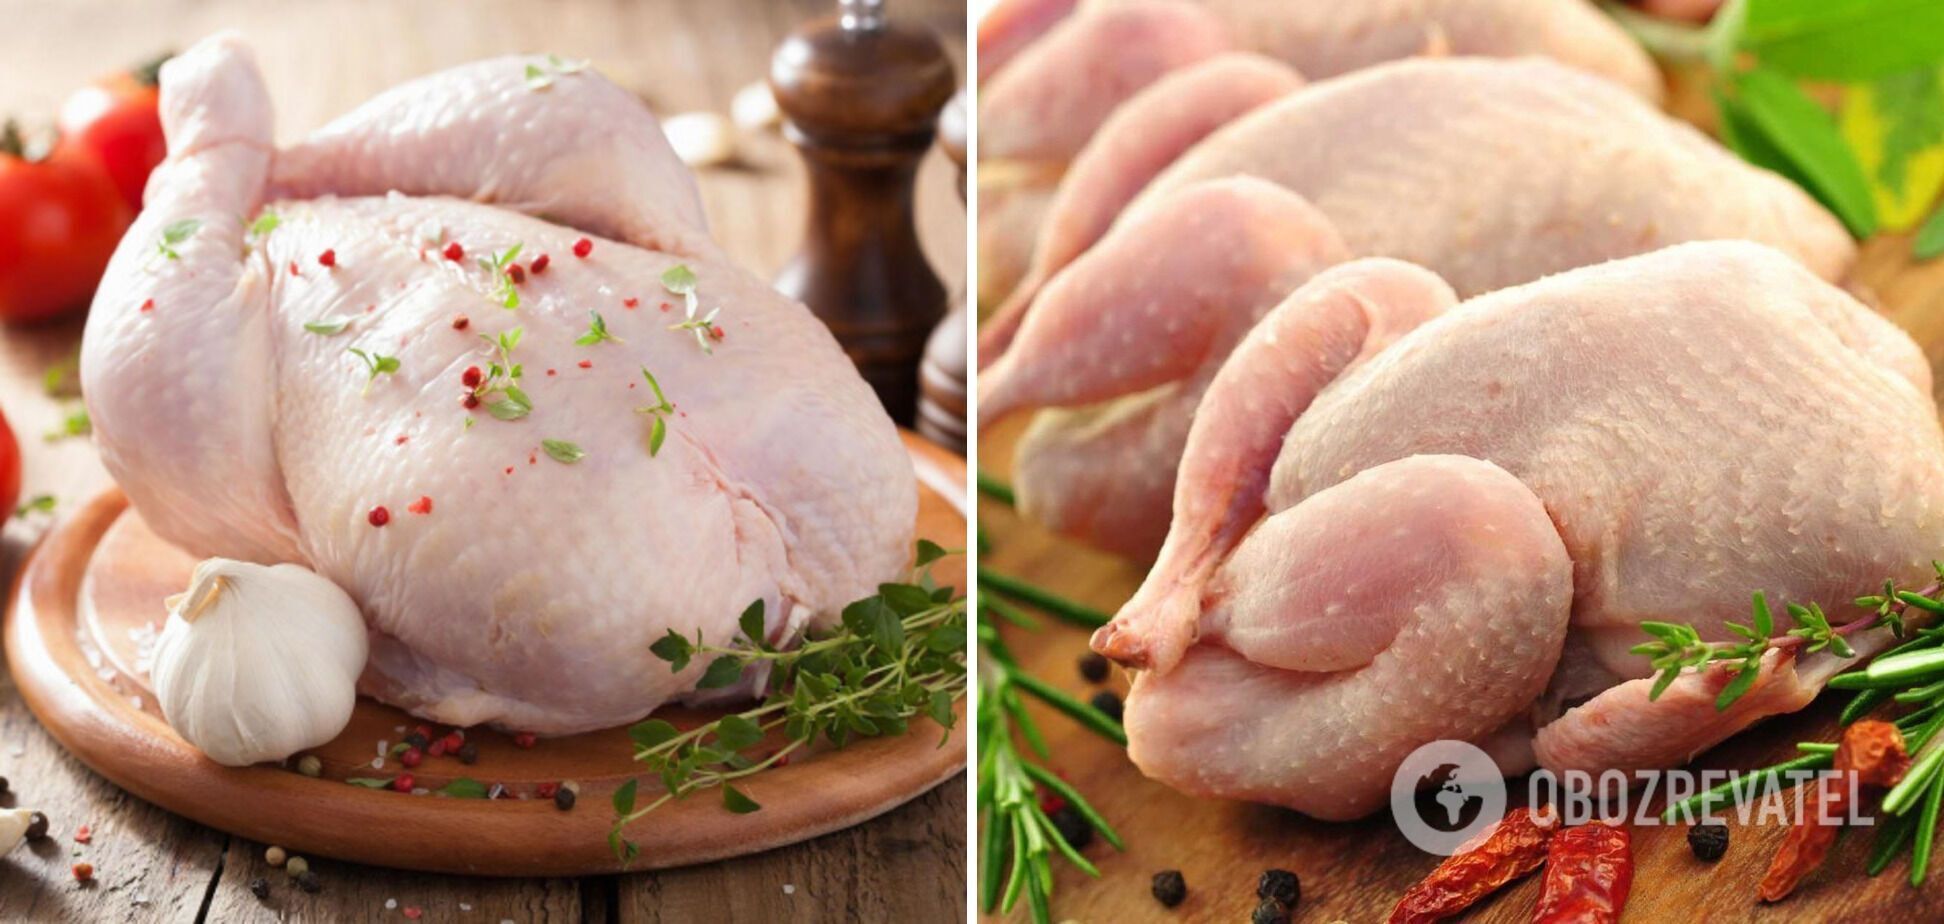 What not to marinate chicken in: the meat will be dry